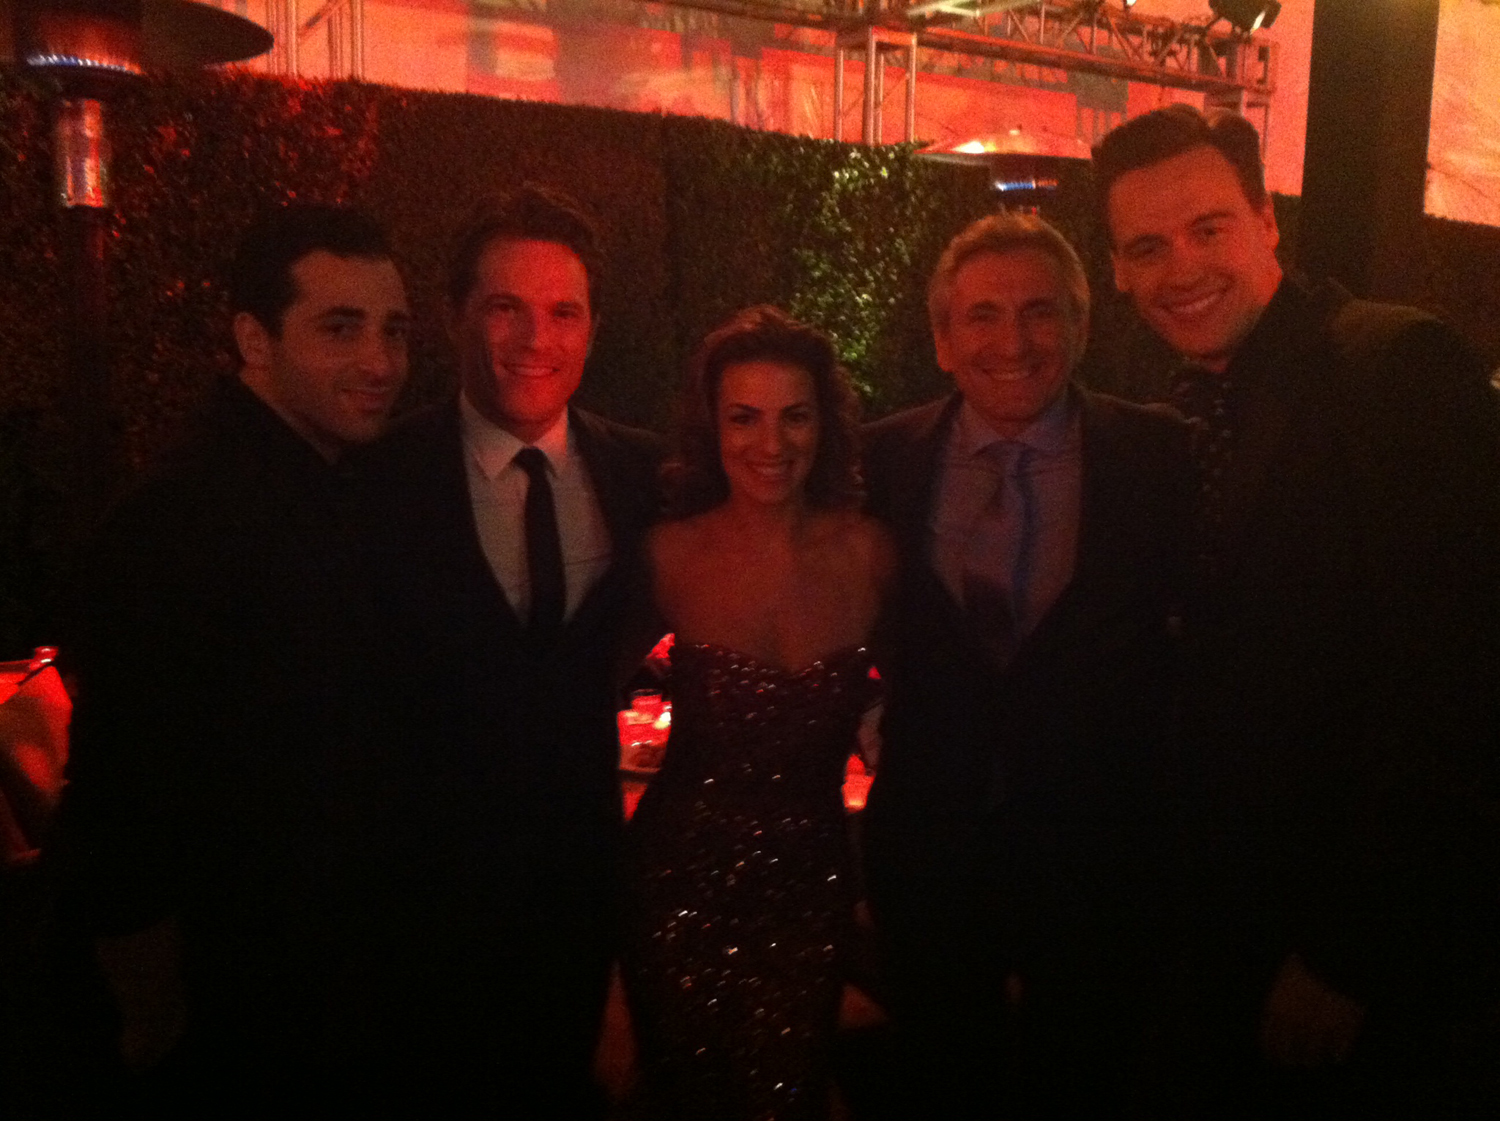 Eric Bergen, Lou Volpe, Renee Marino, Mike Doyle & Johnny Connizzaro at the Jersey Boys movie premiere after party.